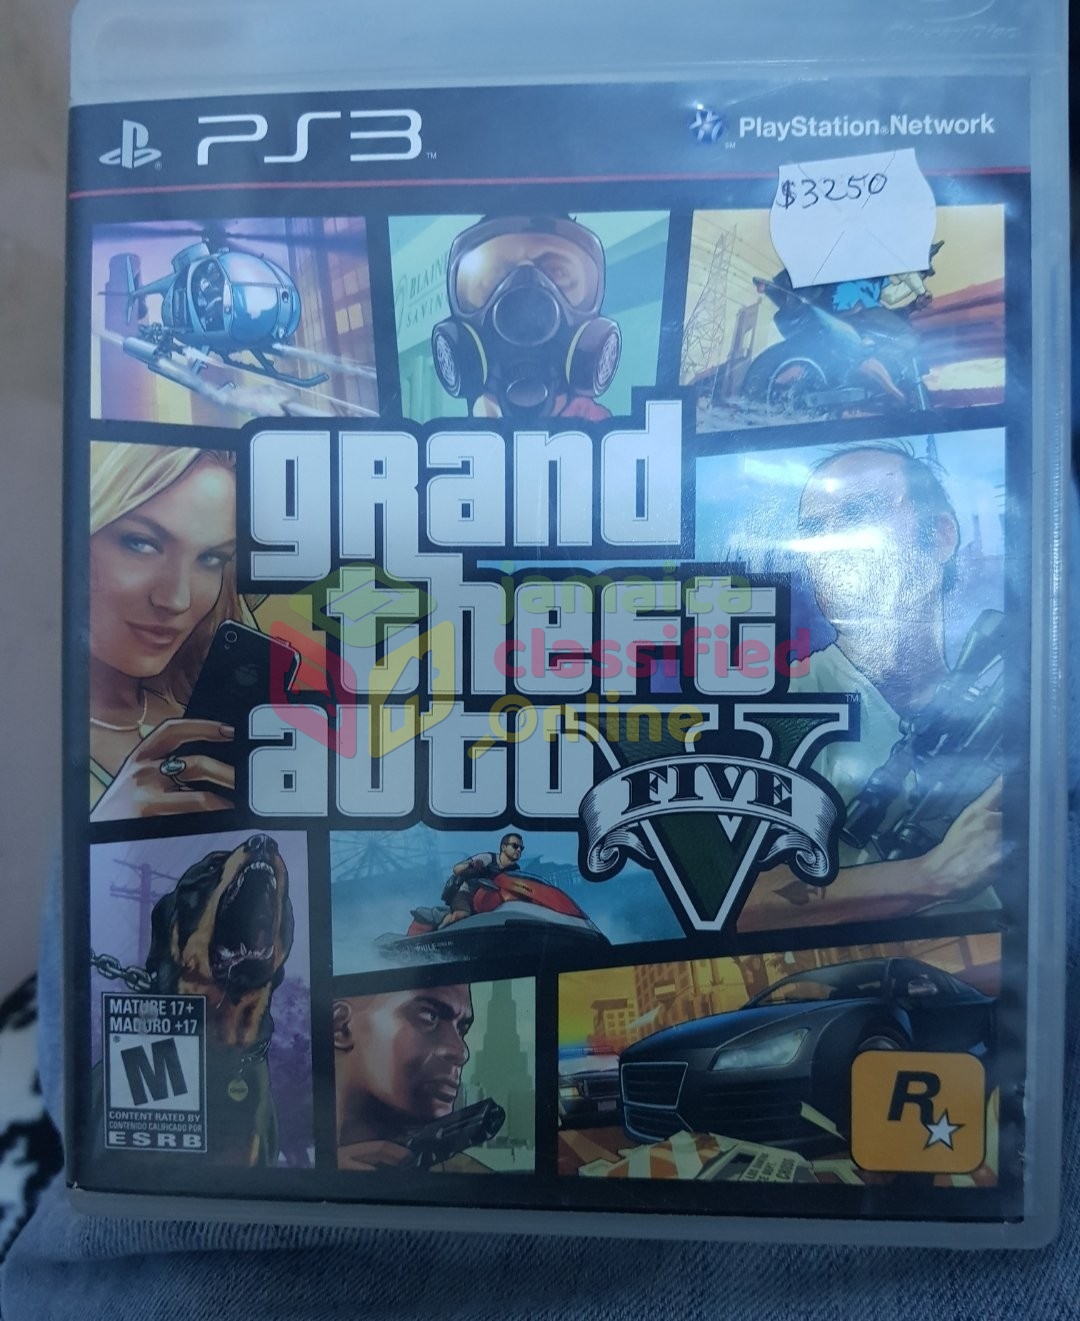 gta 5 for ps3 for sale